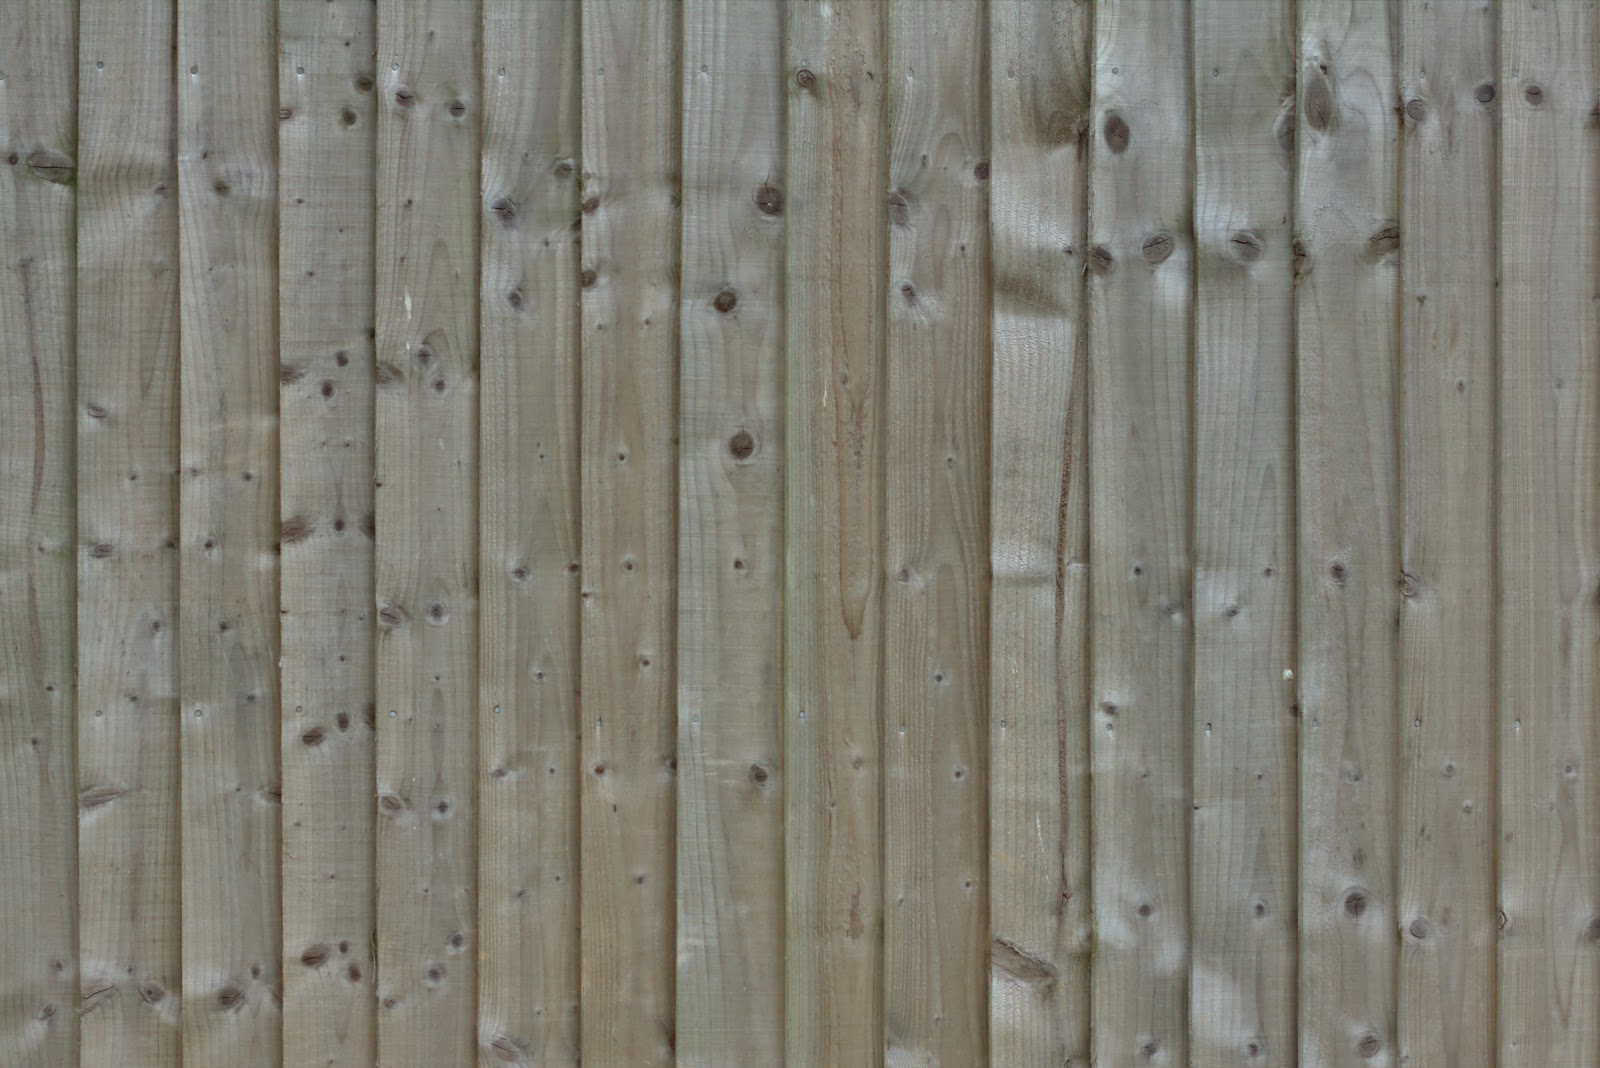 (Wood 24) fence gate panel texture